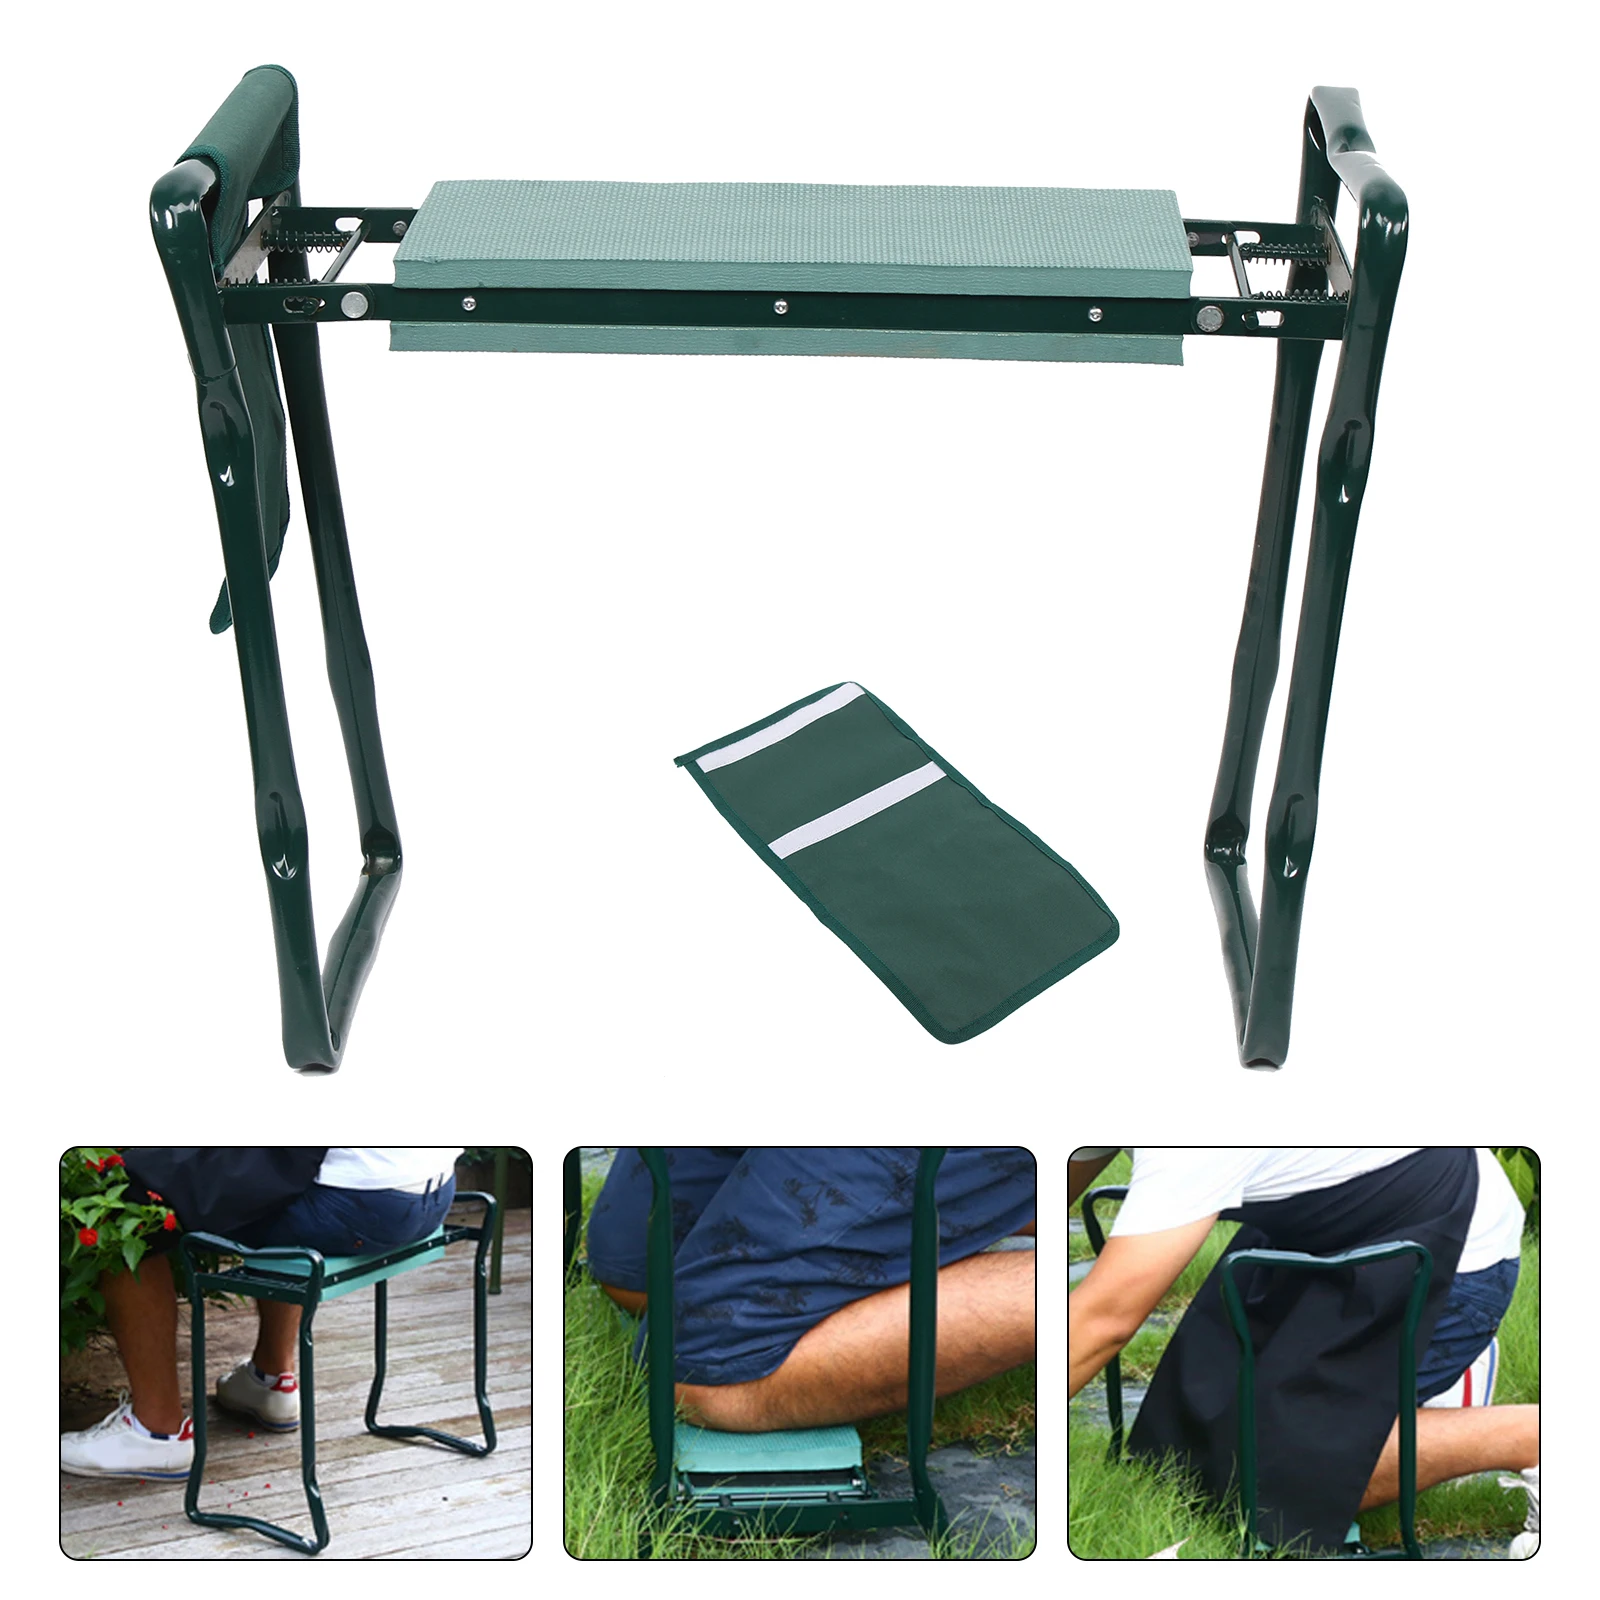 

Garden Kneeling Stool and Seat, 220 lb. Load Capacity EVA Folding Garden Stool for Gardening Kneeling Bench